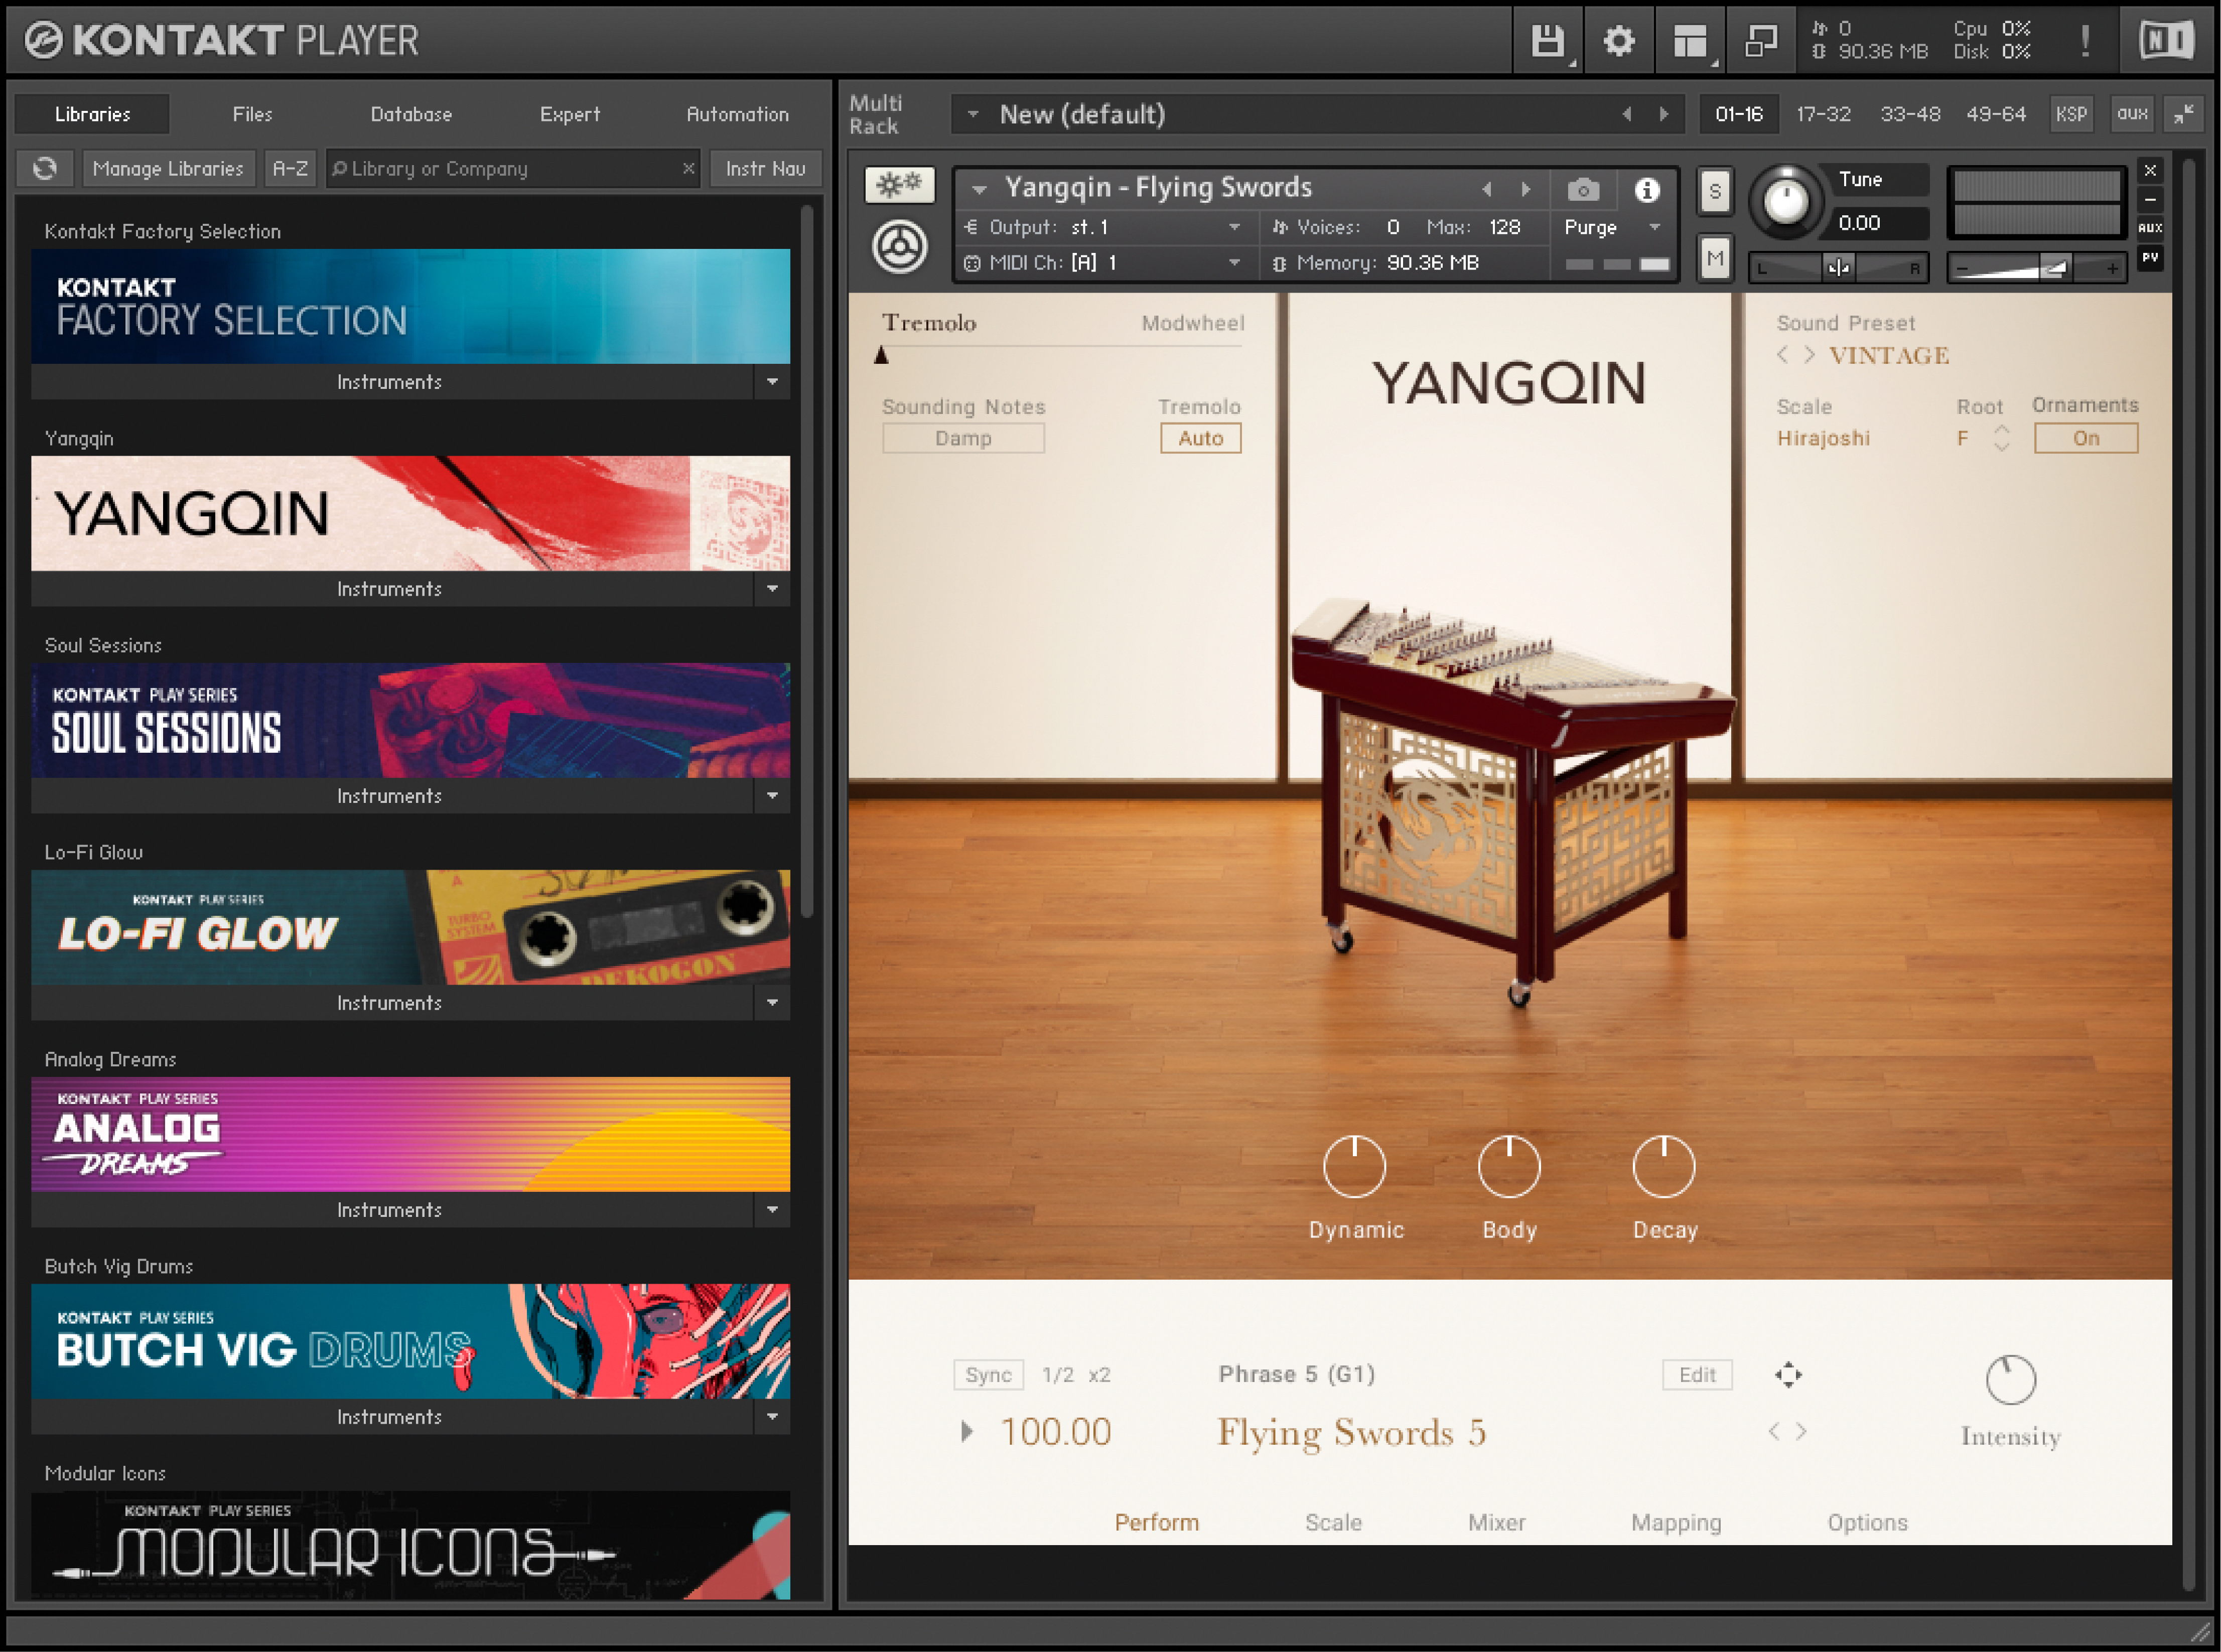 The Kontakt Player interface. The Yangqin instrument has been loaded.